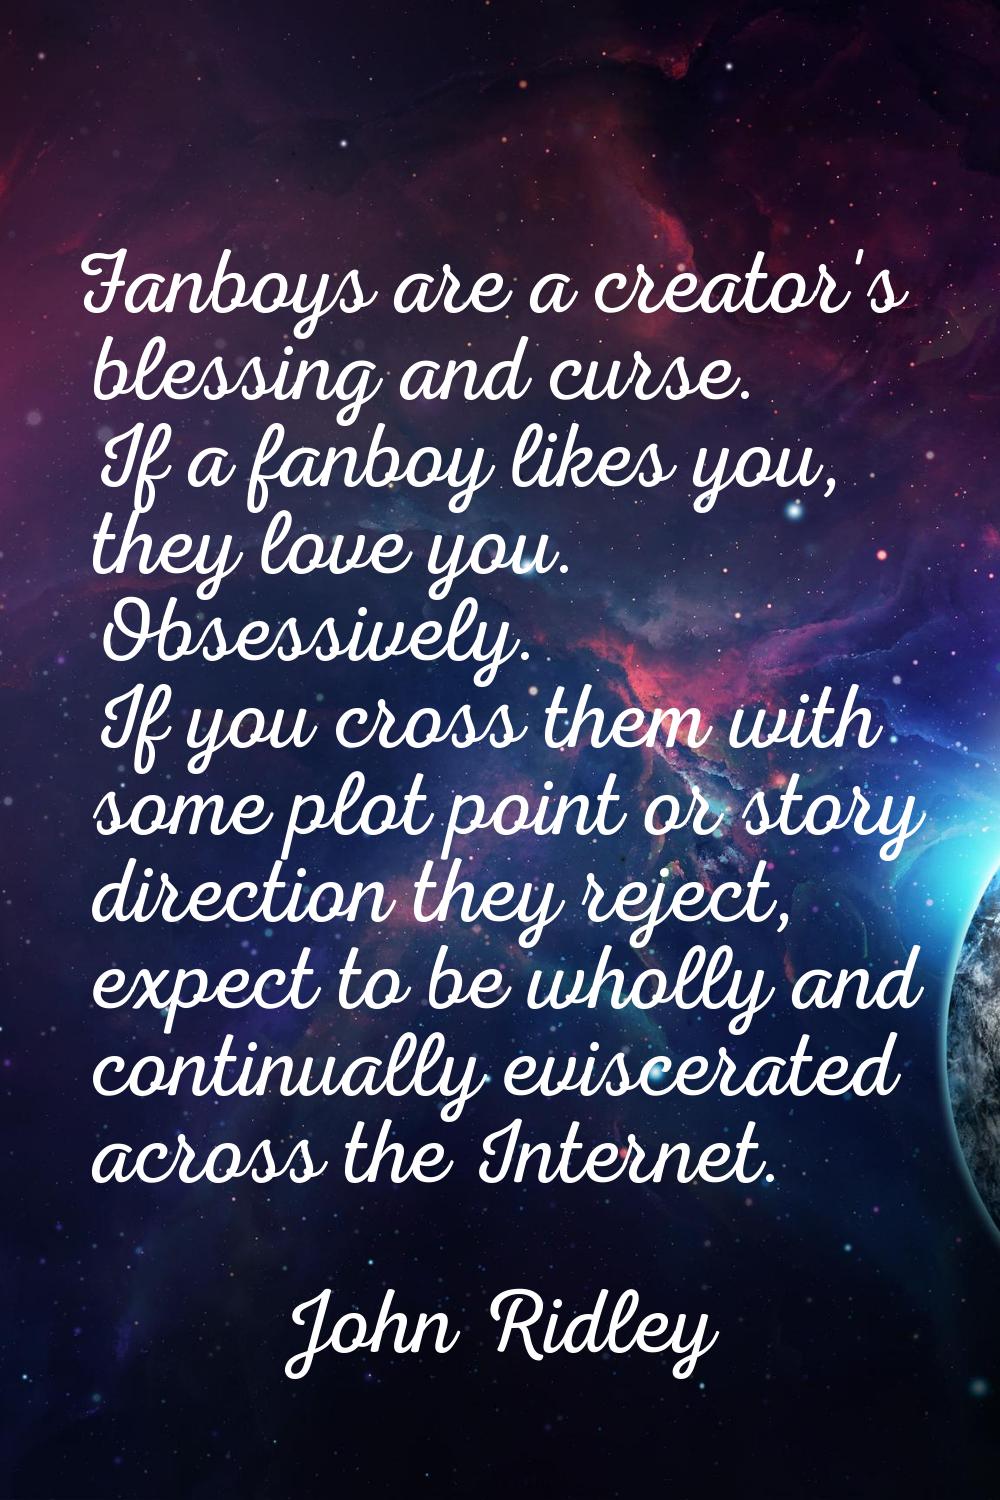 Fanboys are a creator's blessing and curse. If a fanboy likes you, they love you. Obsessively. If y